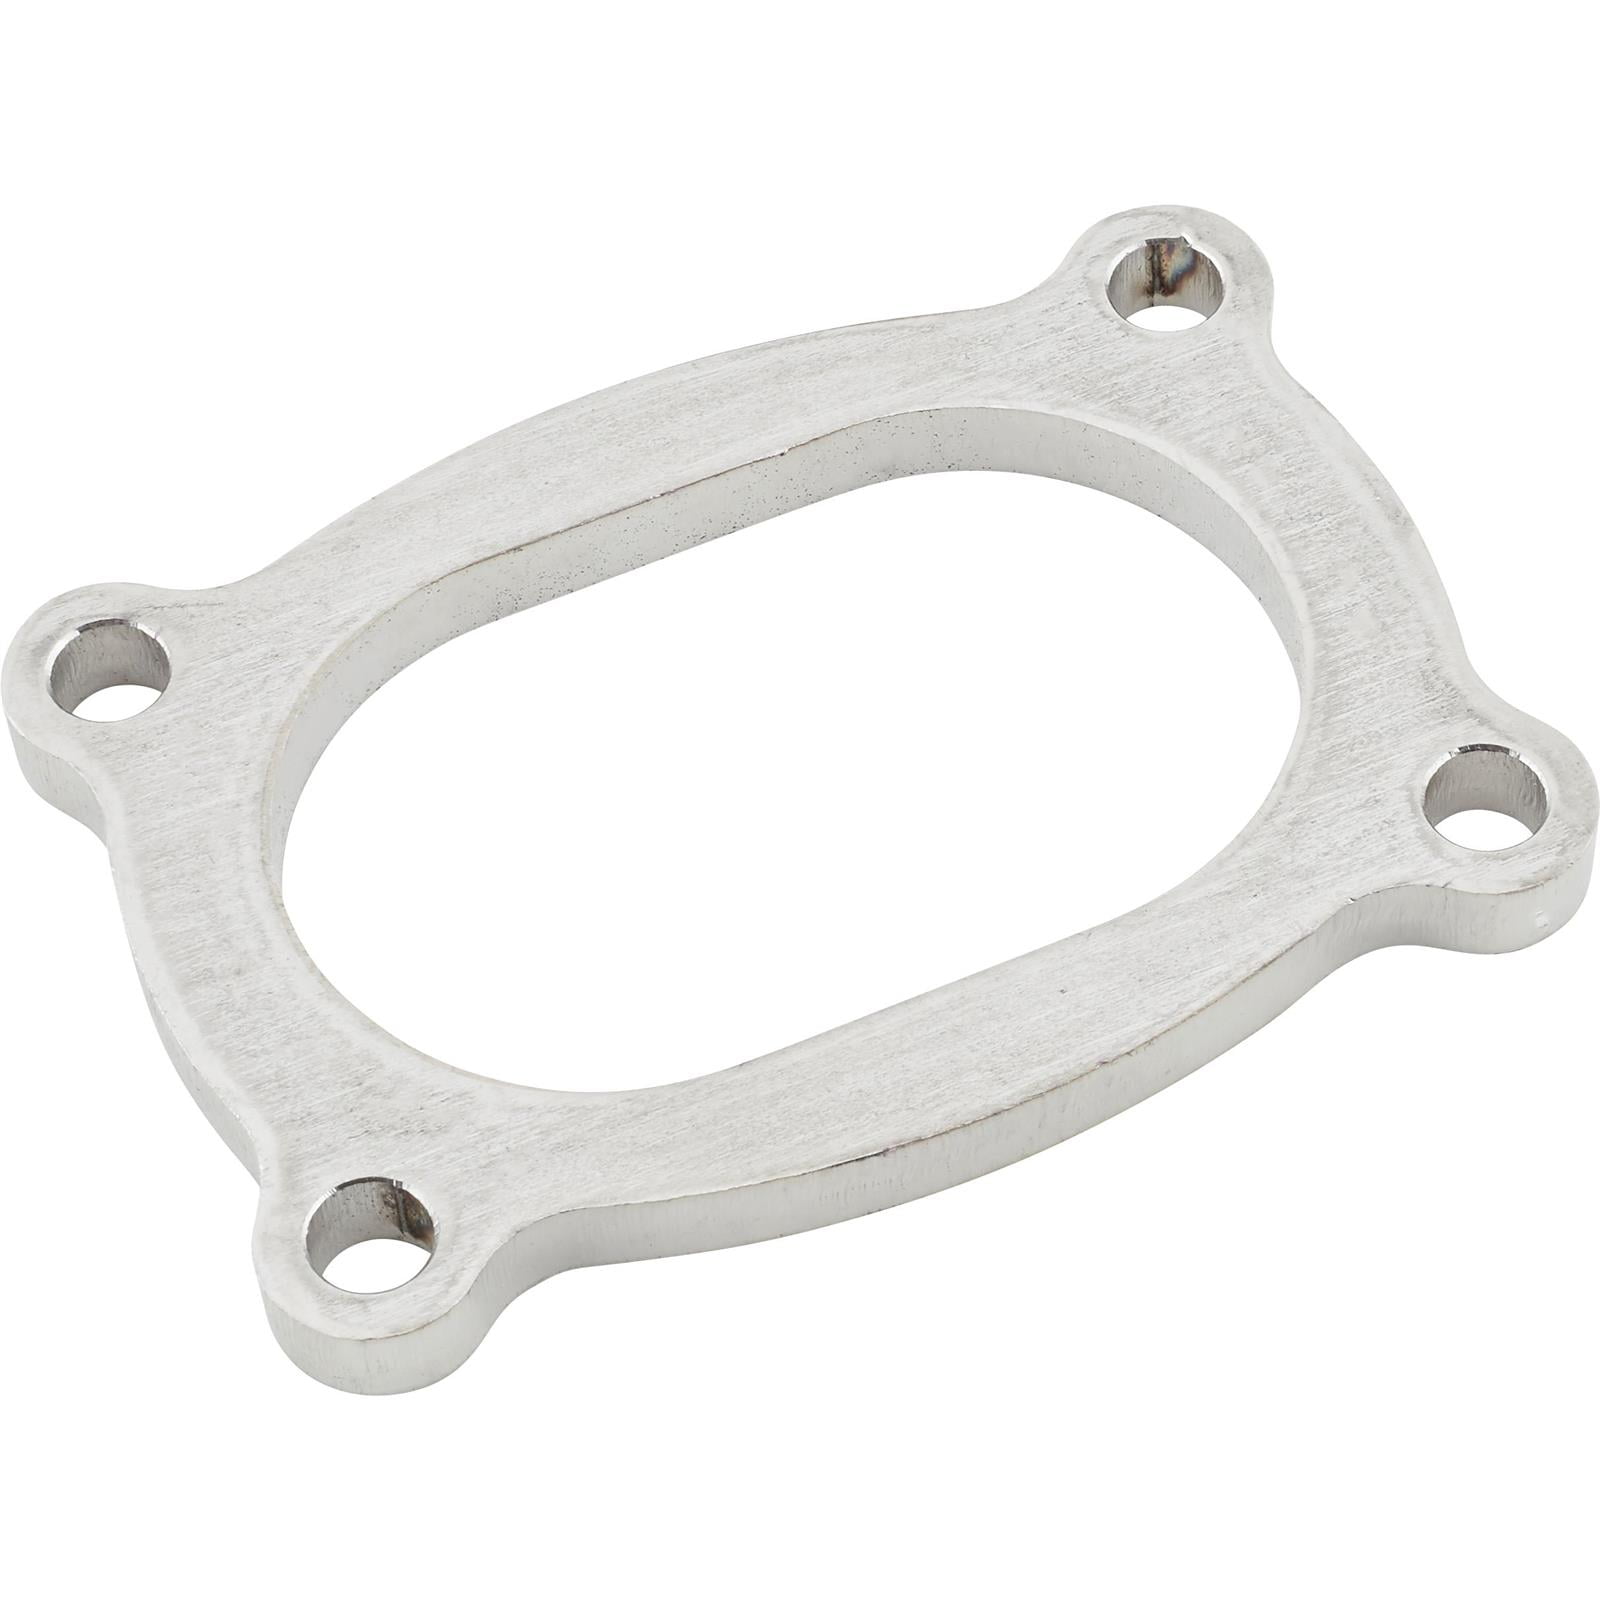 Speedway Oval Exhaust Flange, 3 Inch, Stainless Steel